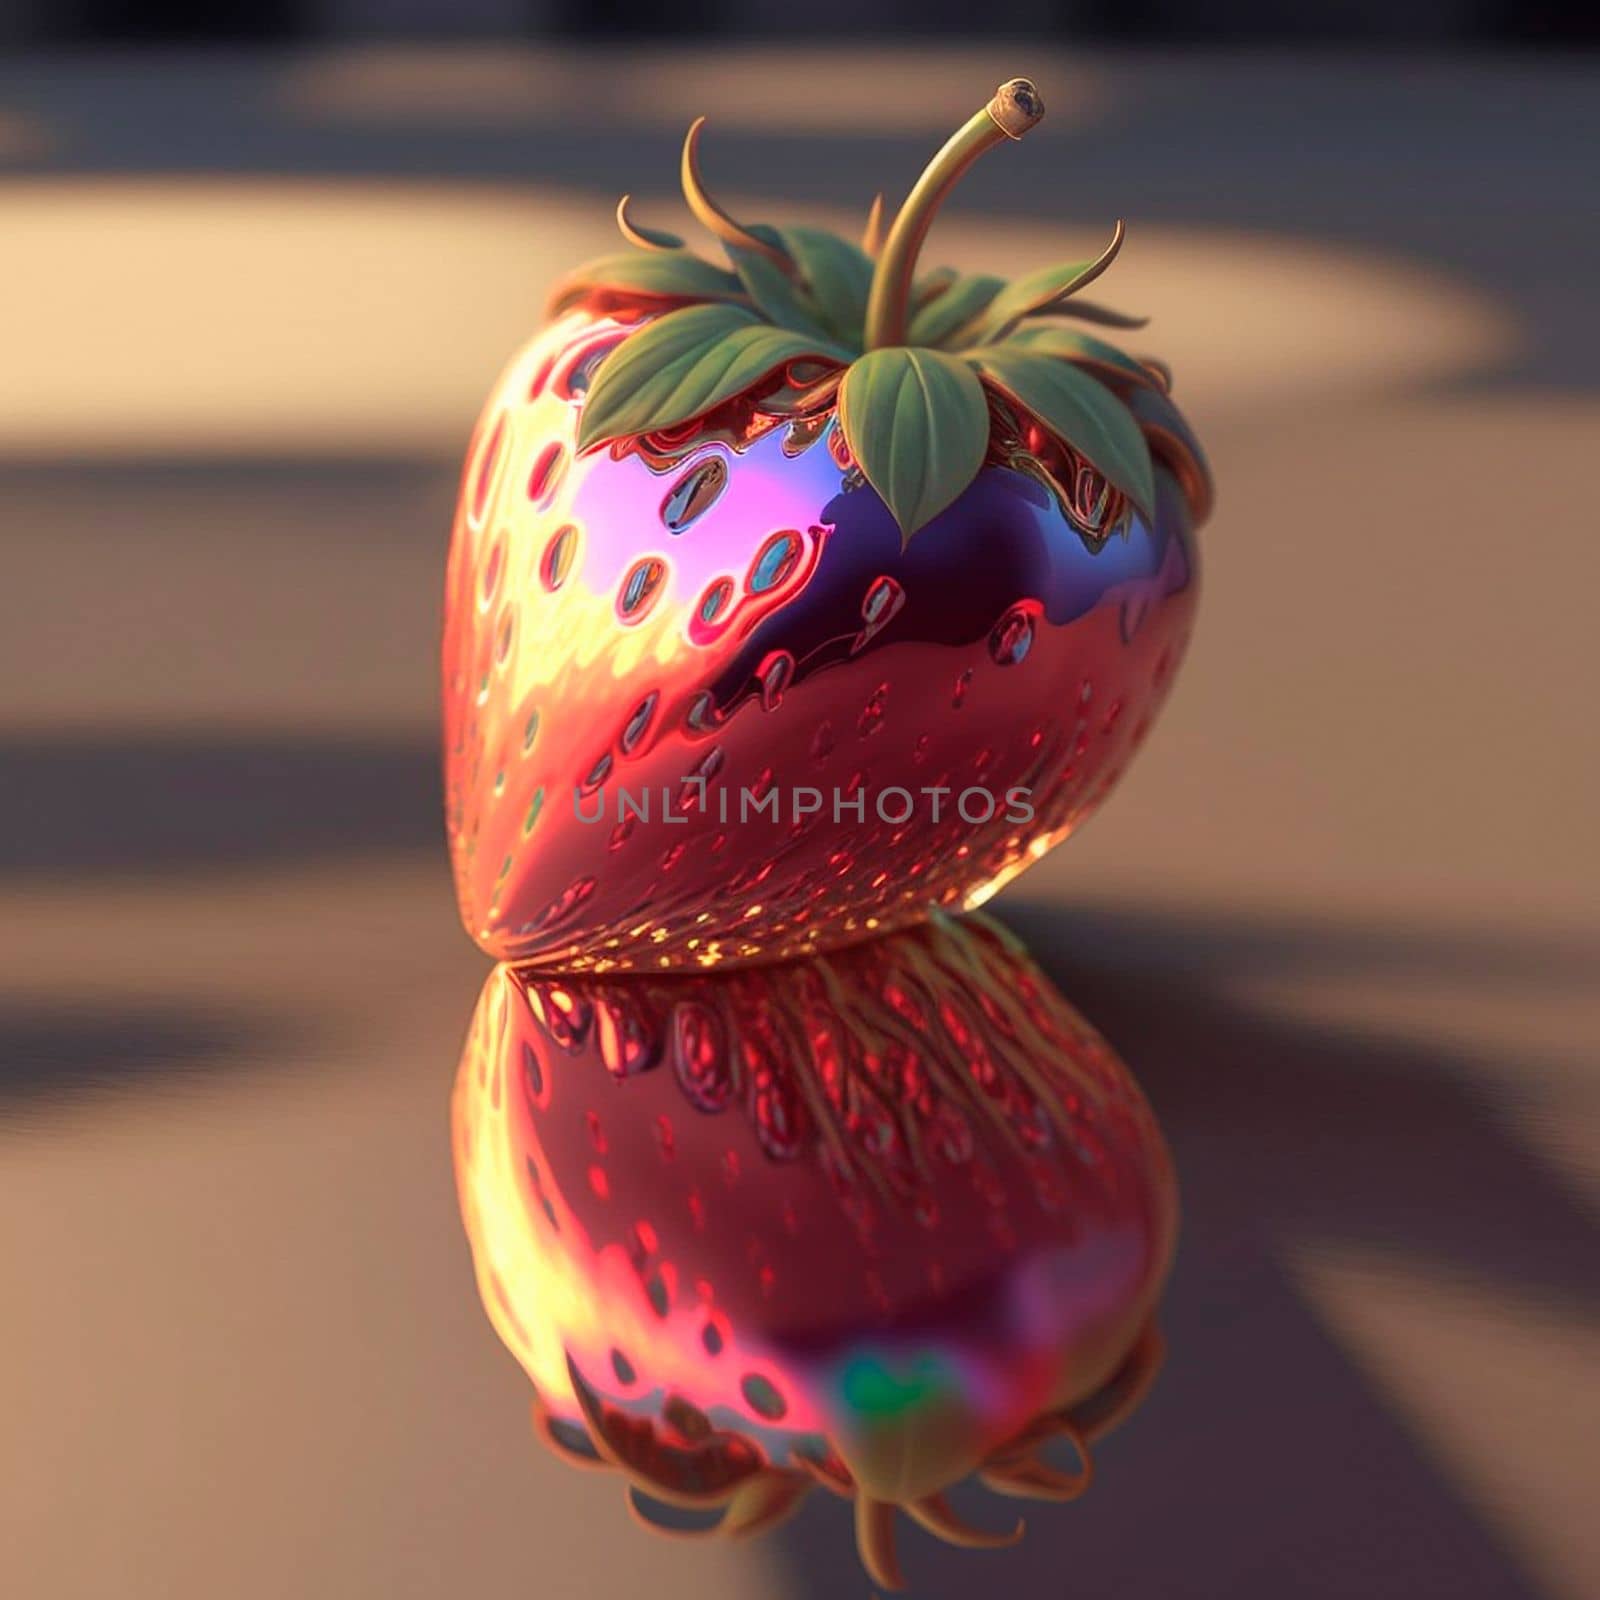 3d image of a shiny and juicy strawberry on the table . High quality illustration